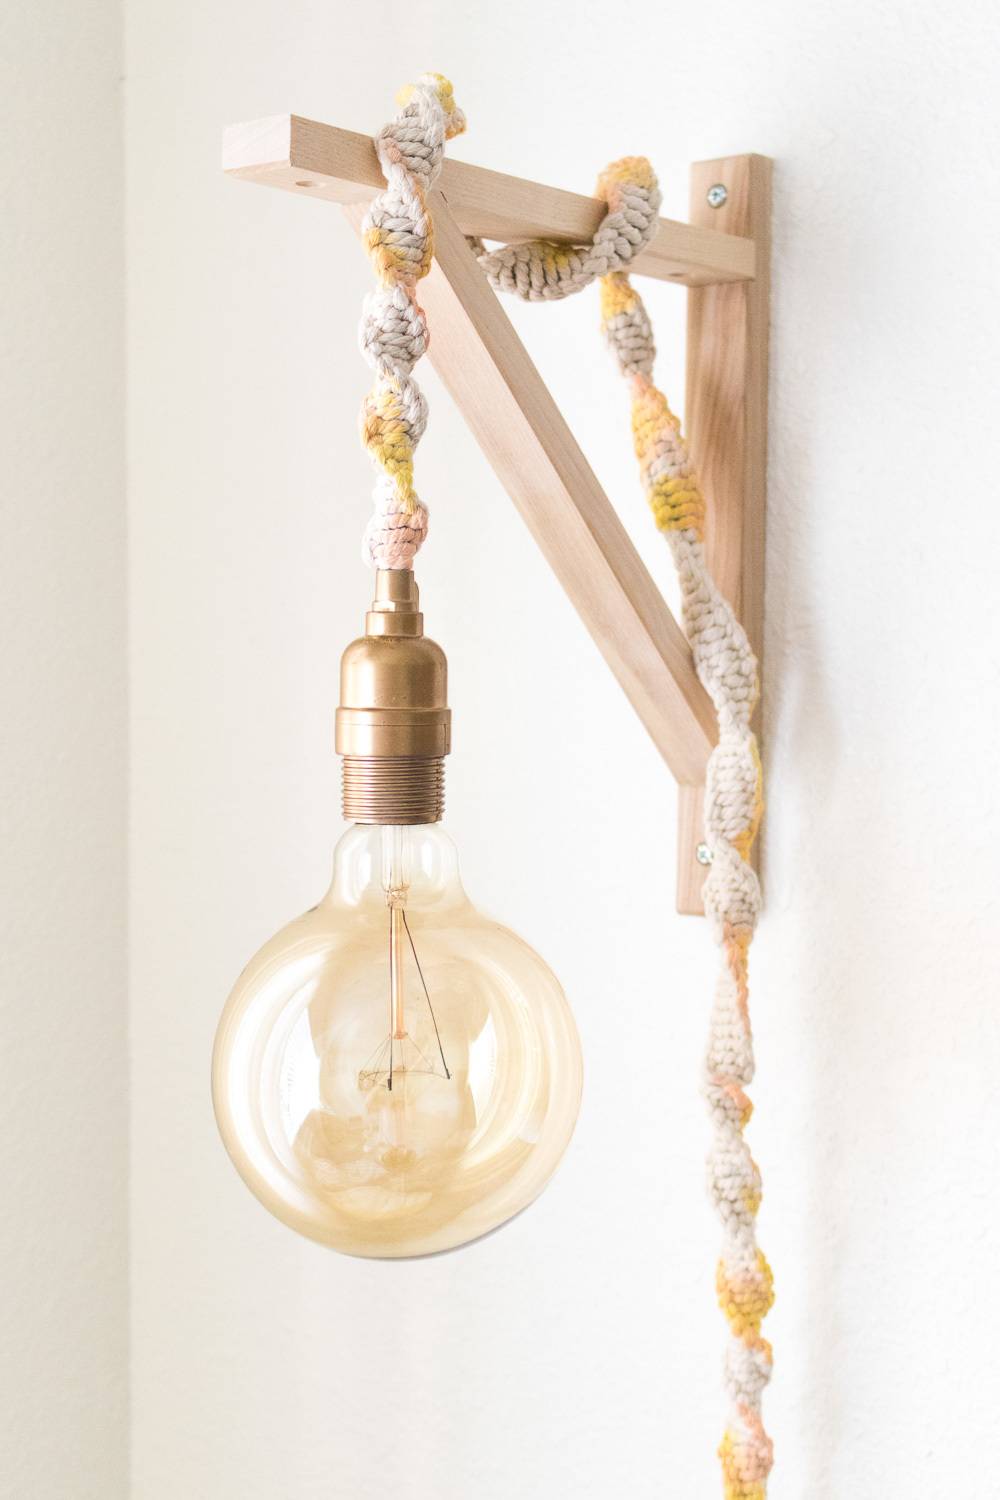 A beautifully designed decorative ight fixture with a bare bulb.